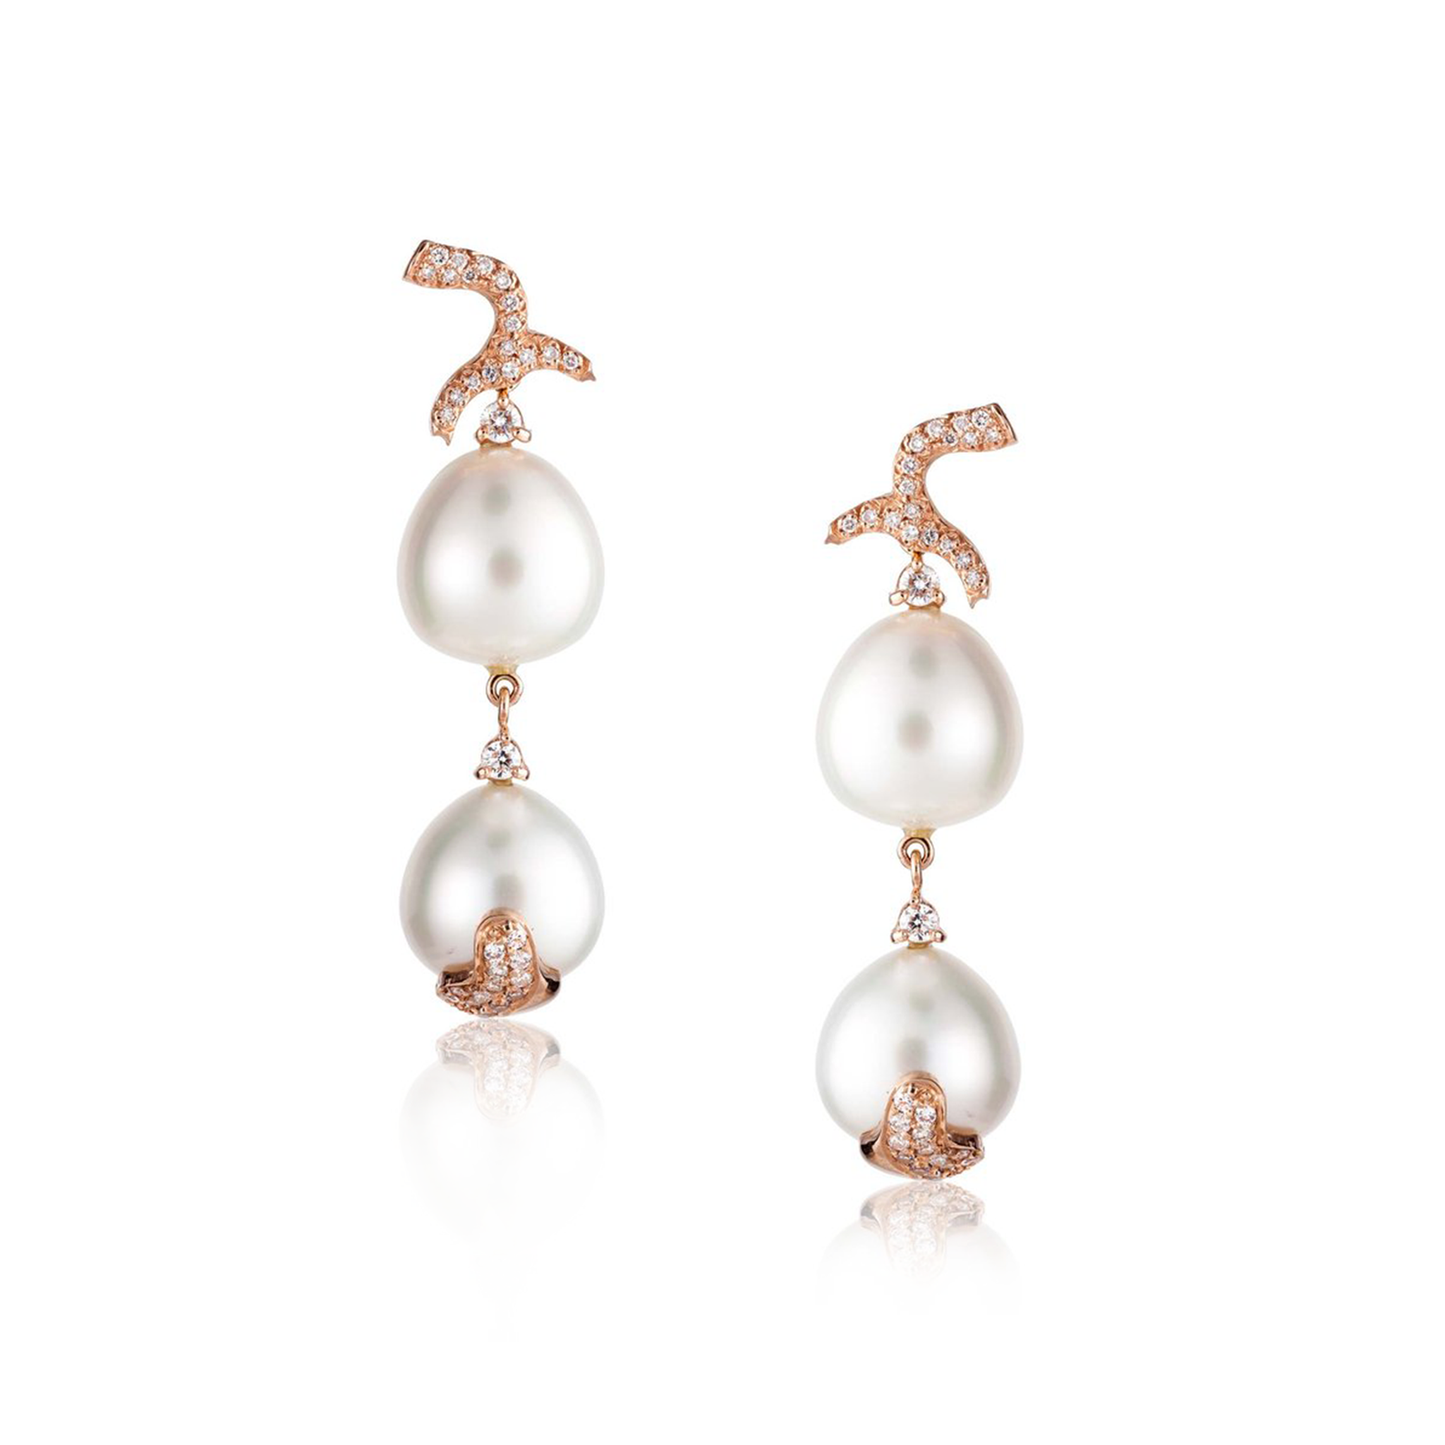 14k Rose Gold Earrings with South Sea Pearls and Diamonds